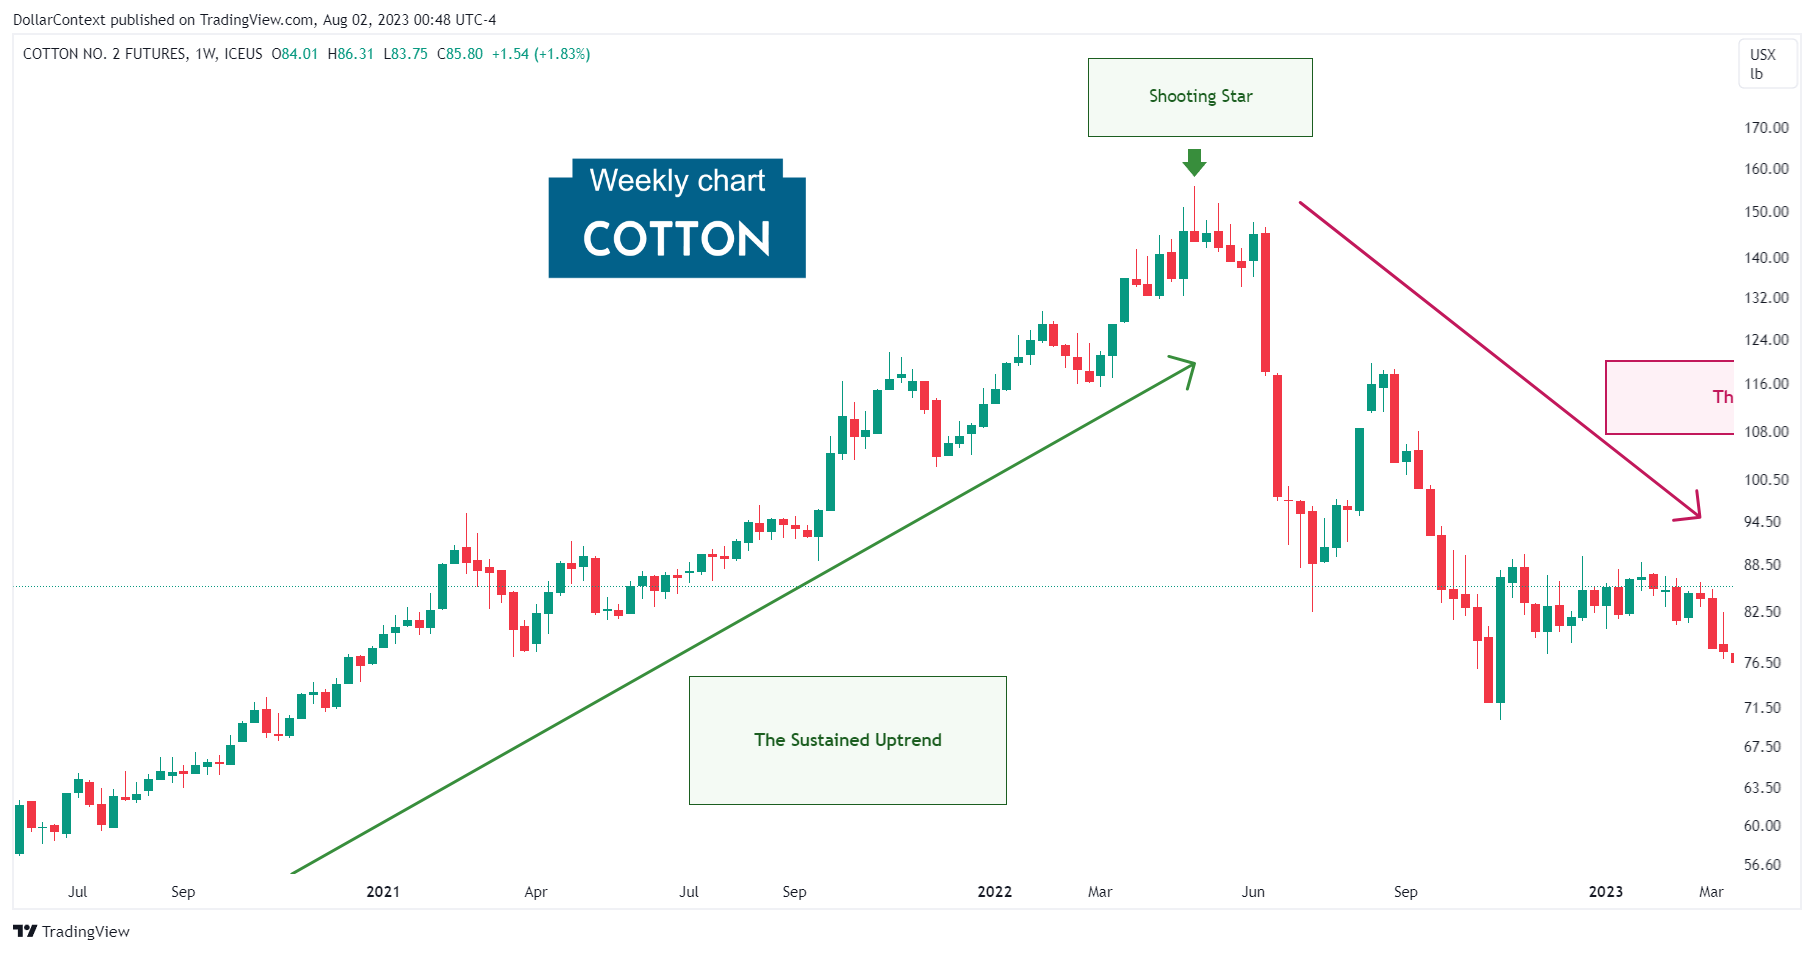 Cotton Futures: Shooting Star in May 2022 (Weekly Chart)